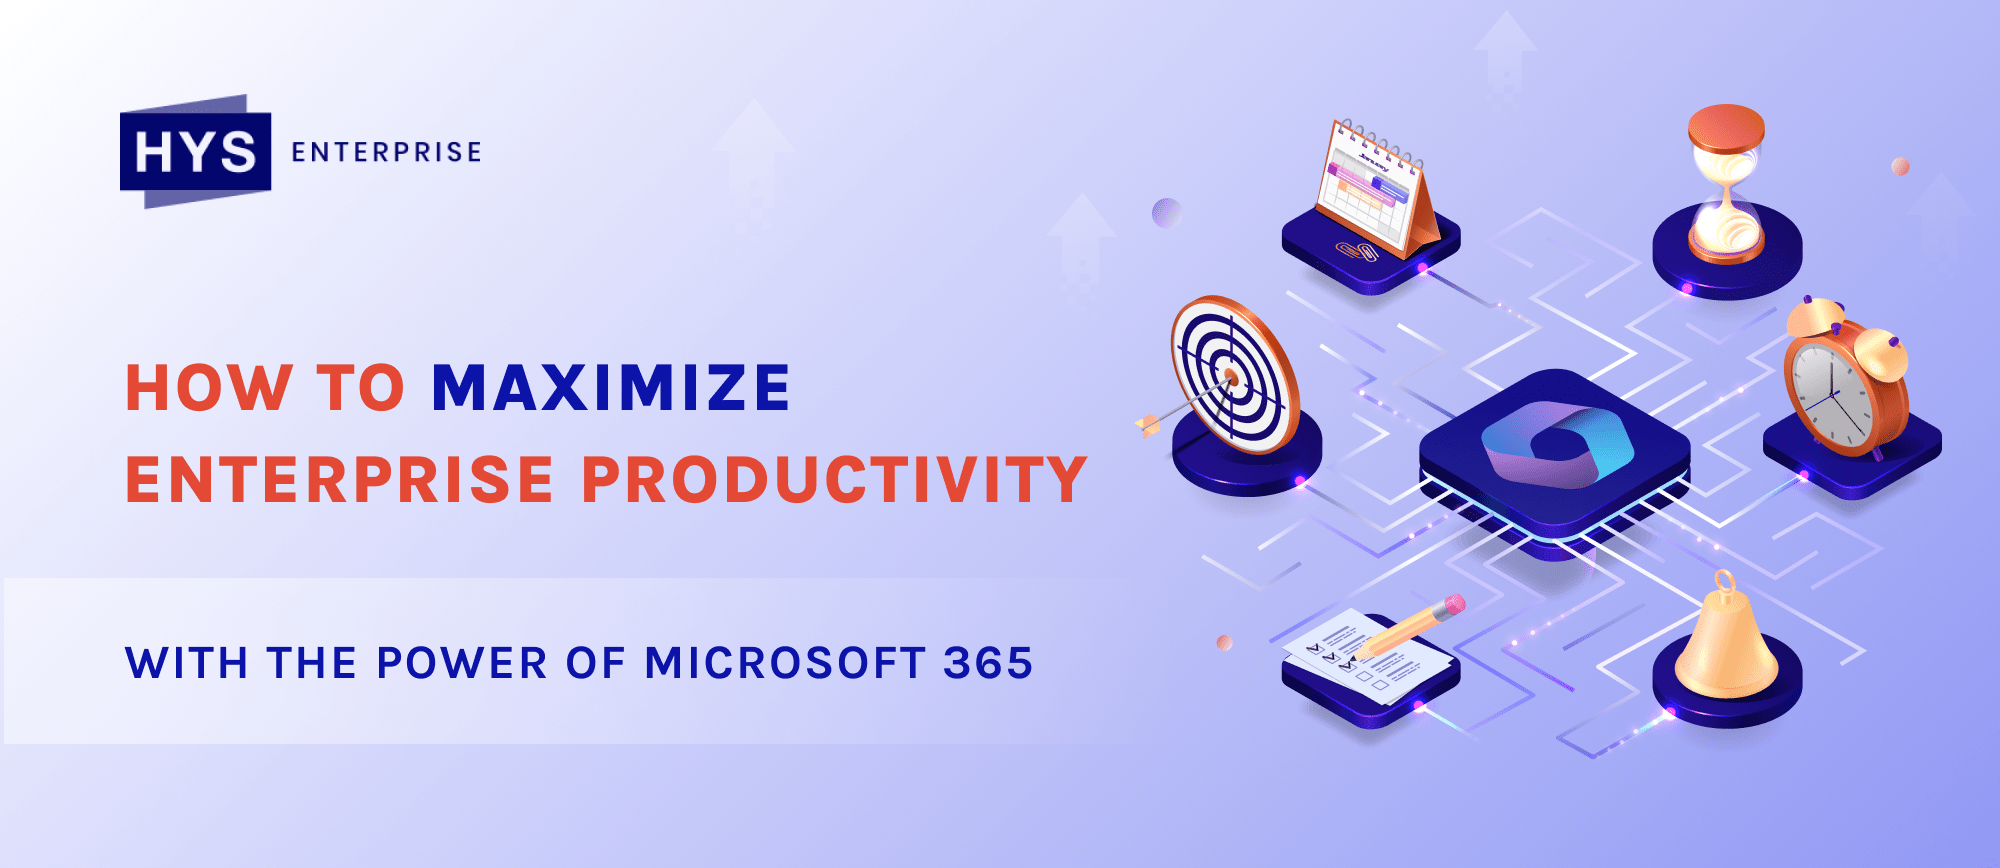 How to Maximize Enterprise Productivity with the Power of Microsoft 365